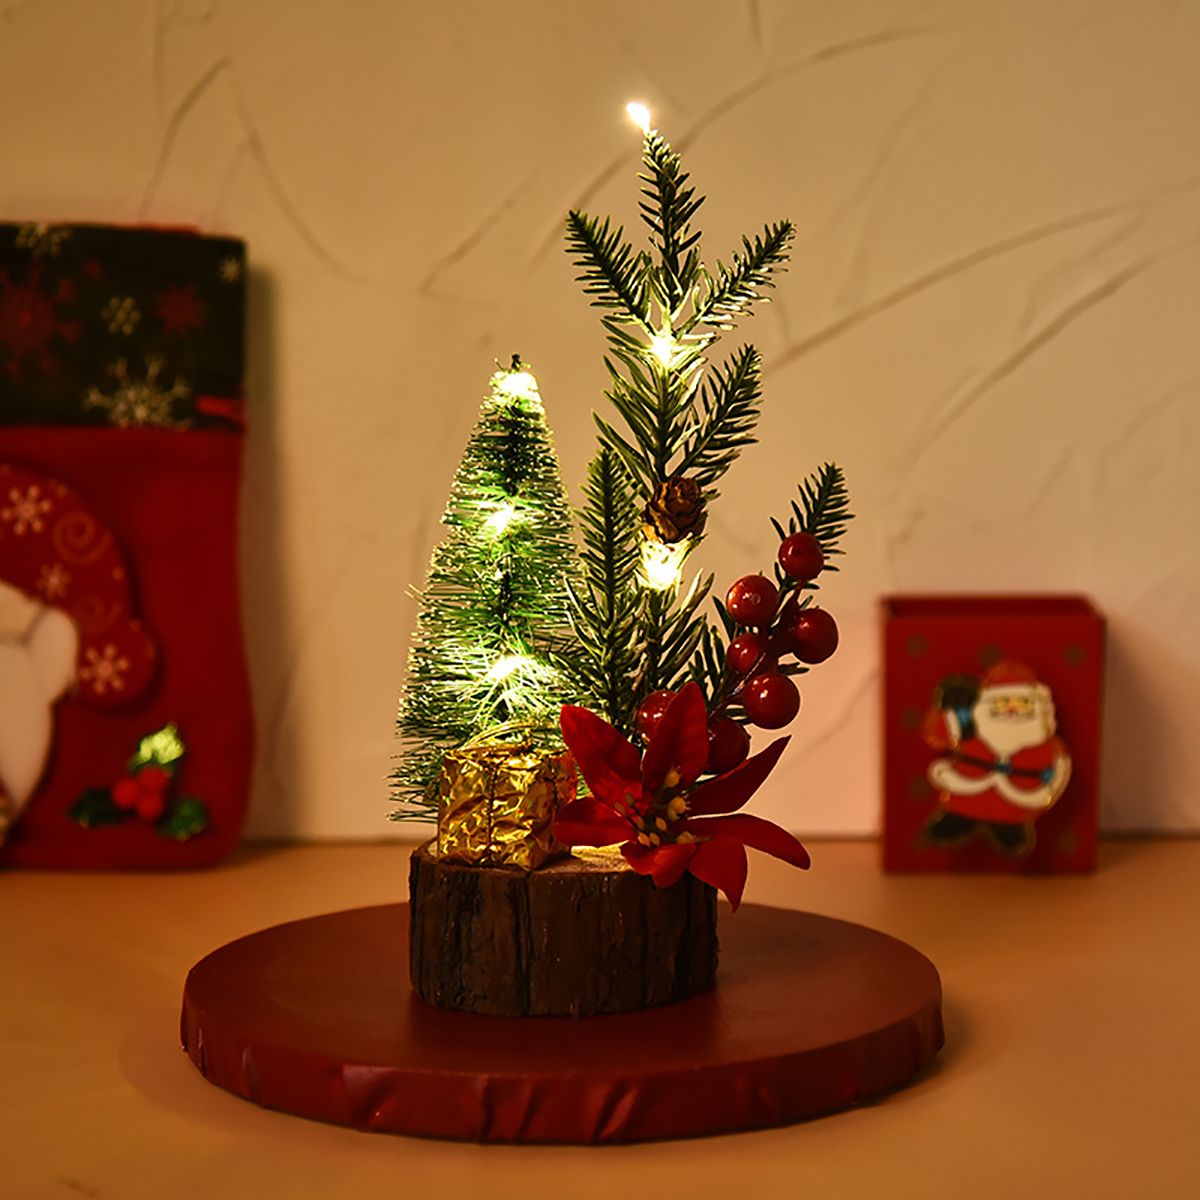 Mini-Wooden-Led-Christmas-Tree-Desk-Table-Decoration-Gift-Cute-Xmas-Home-Decoration-1738806